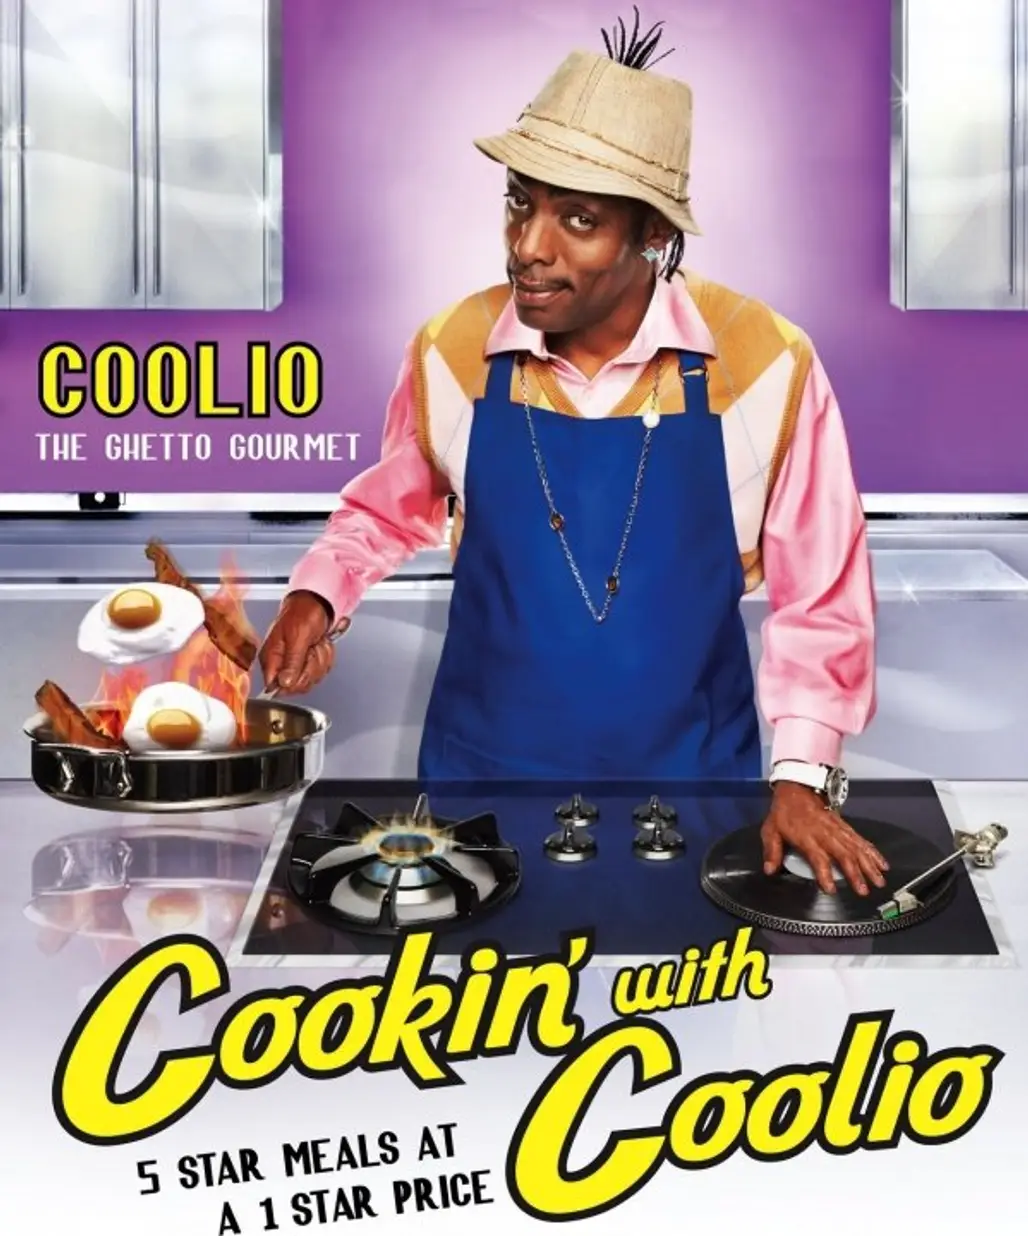 ‘Cooking with Coolio: 5 Star Meals at a 1 Star Price’ by Coolio